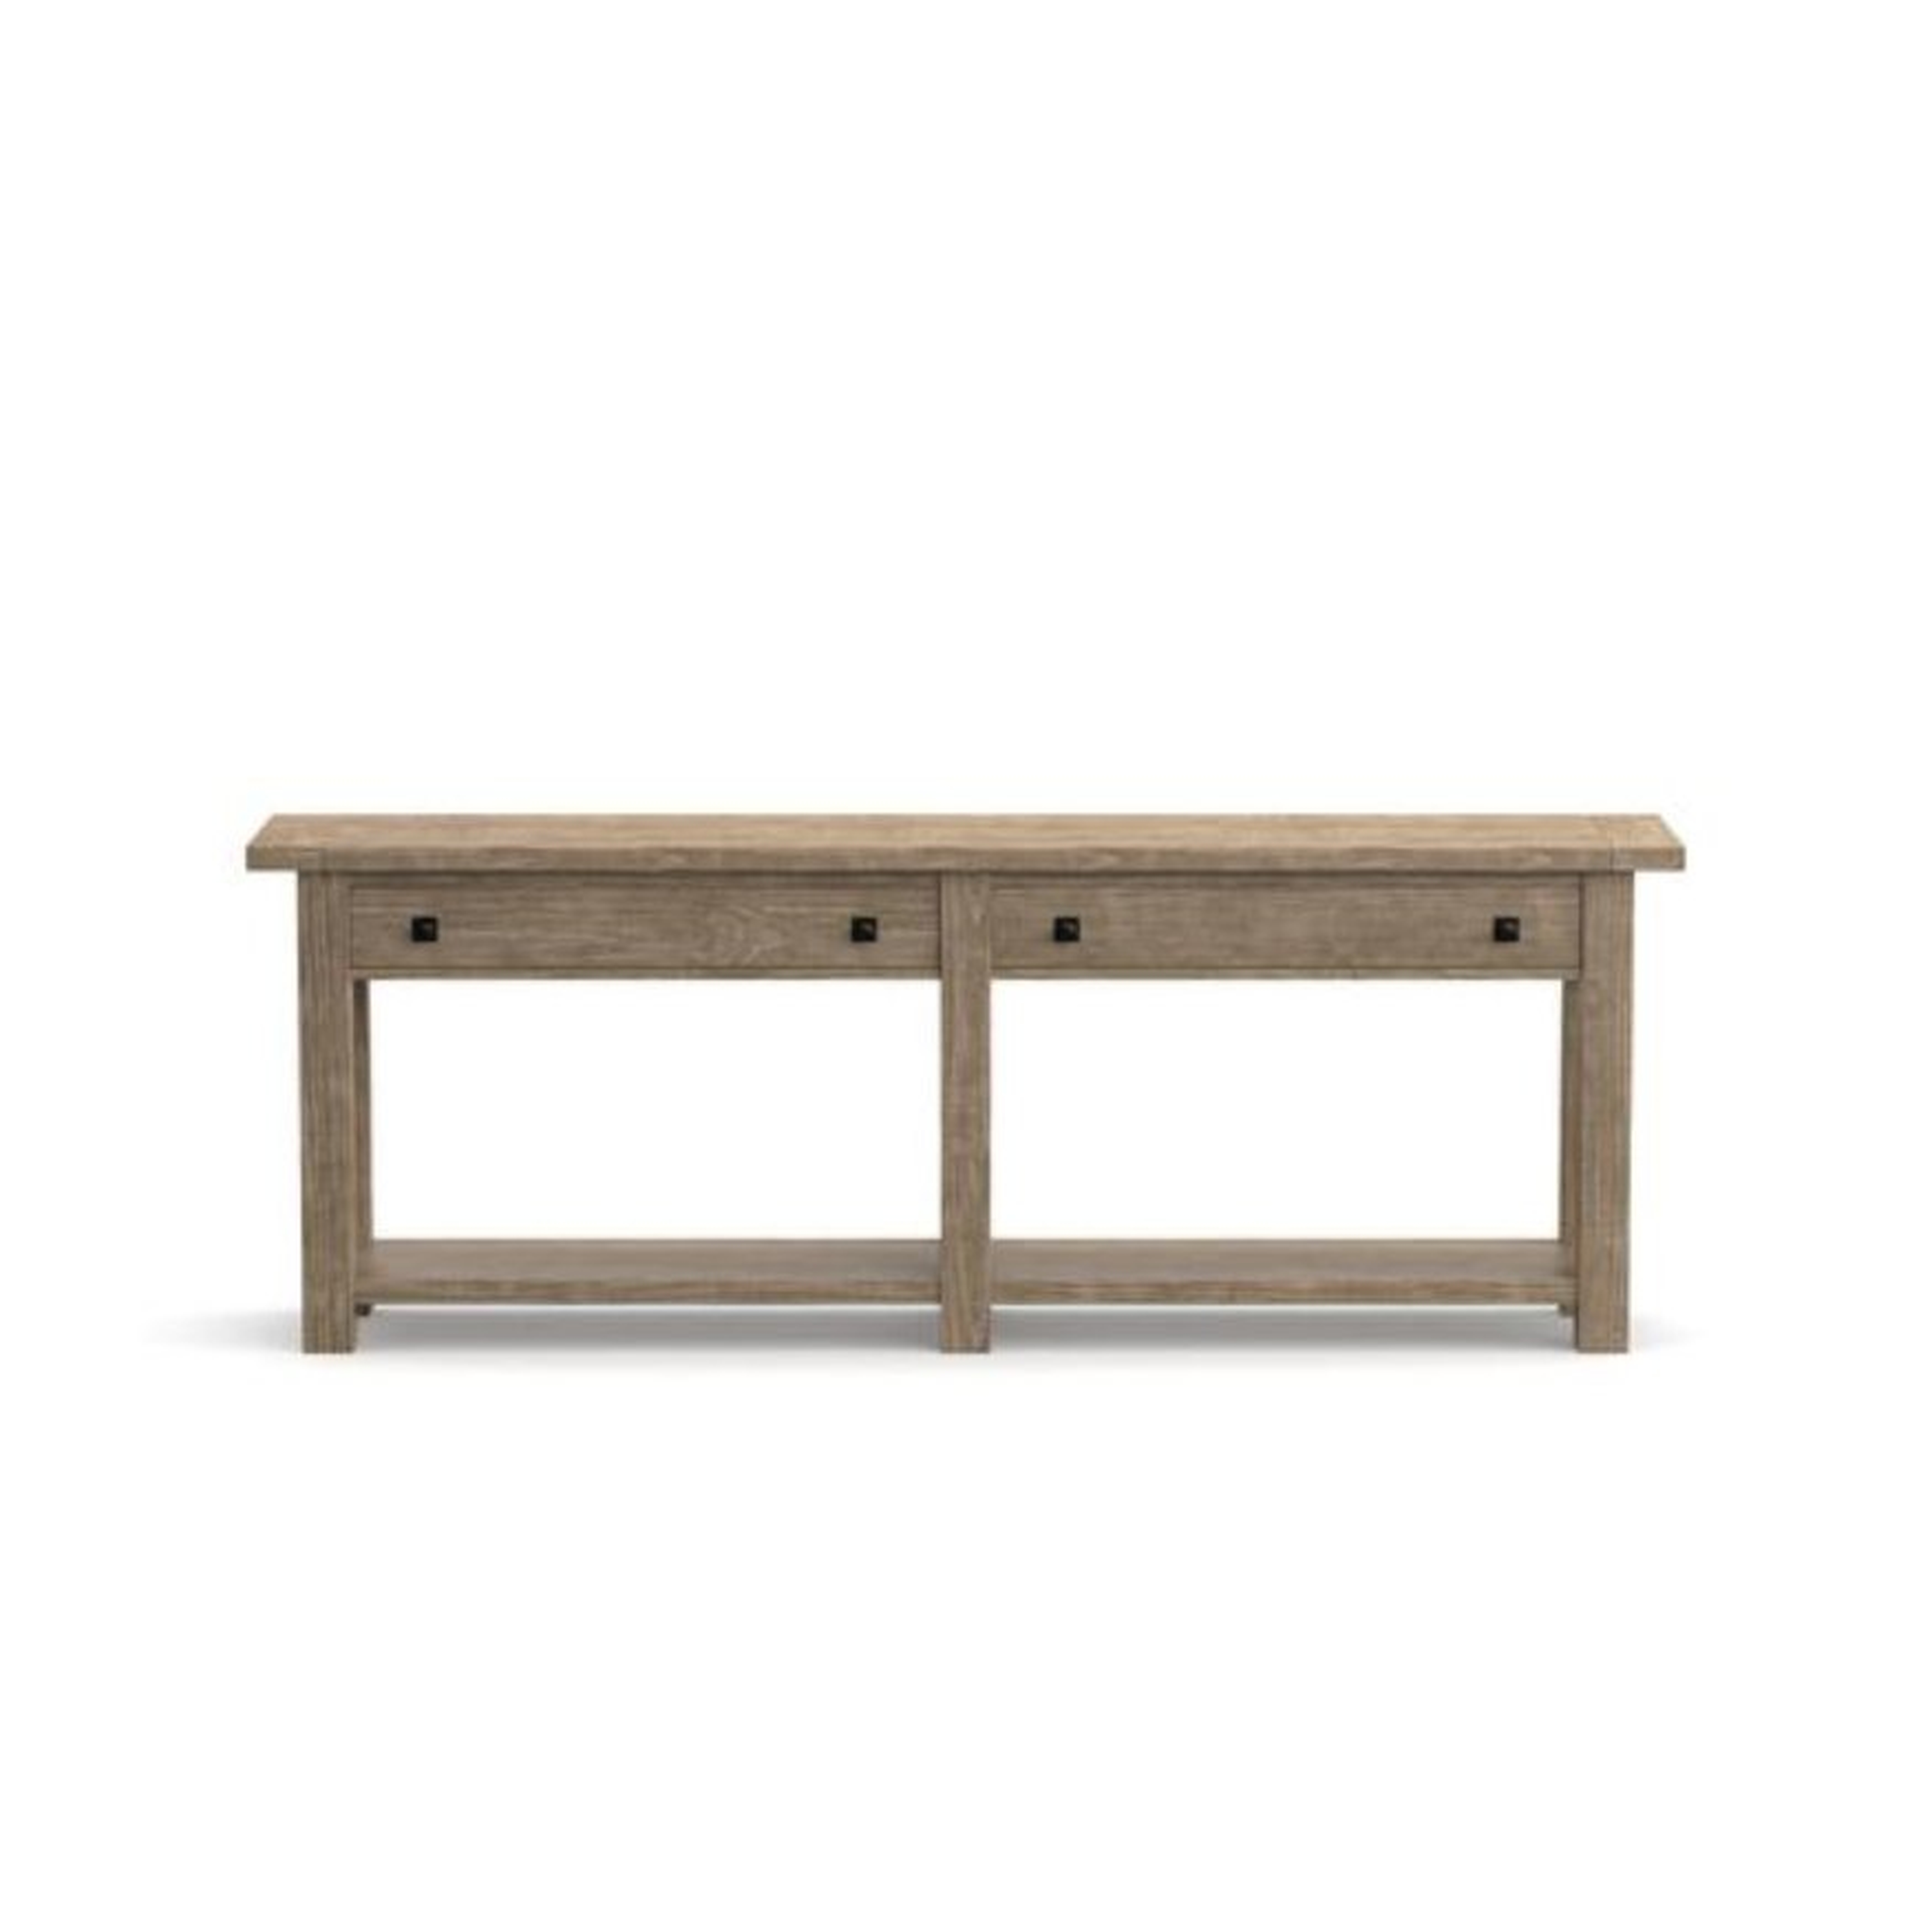 Benchwright 83" Wood Console Table with Drawers, Seadrift - Pottery Barn